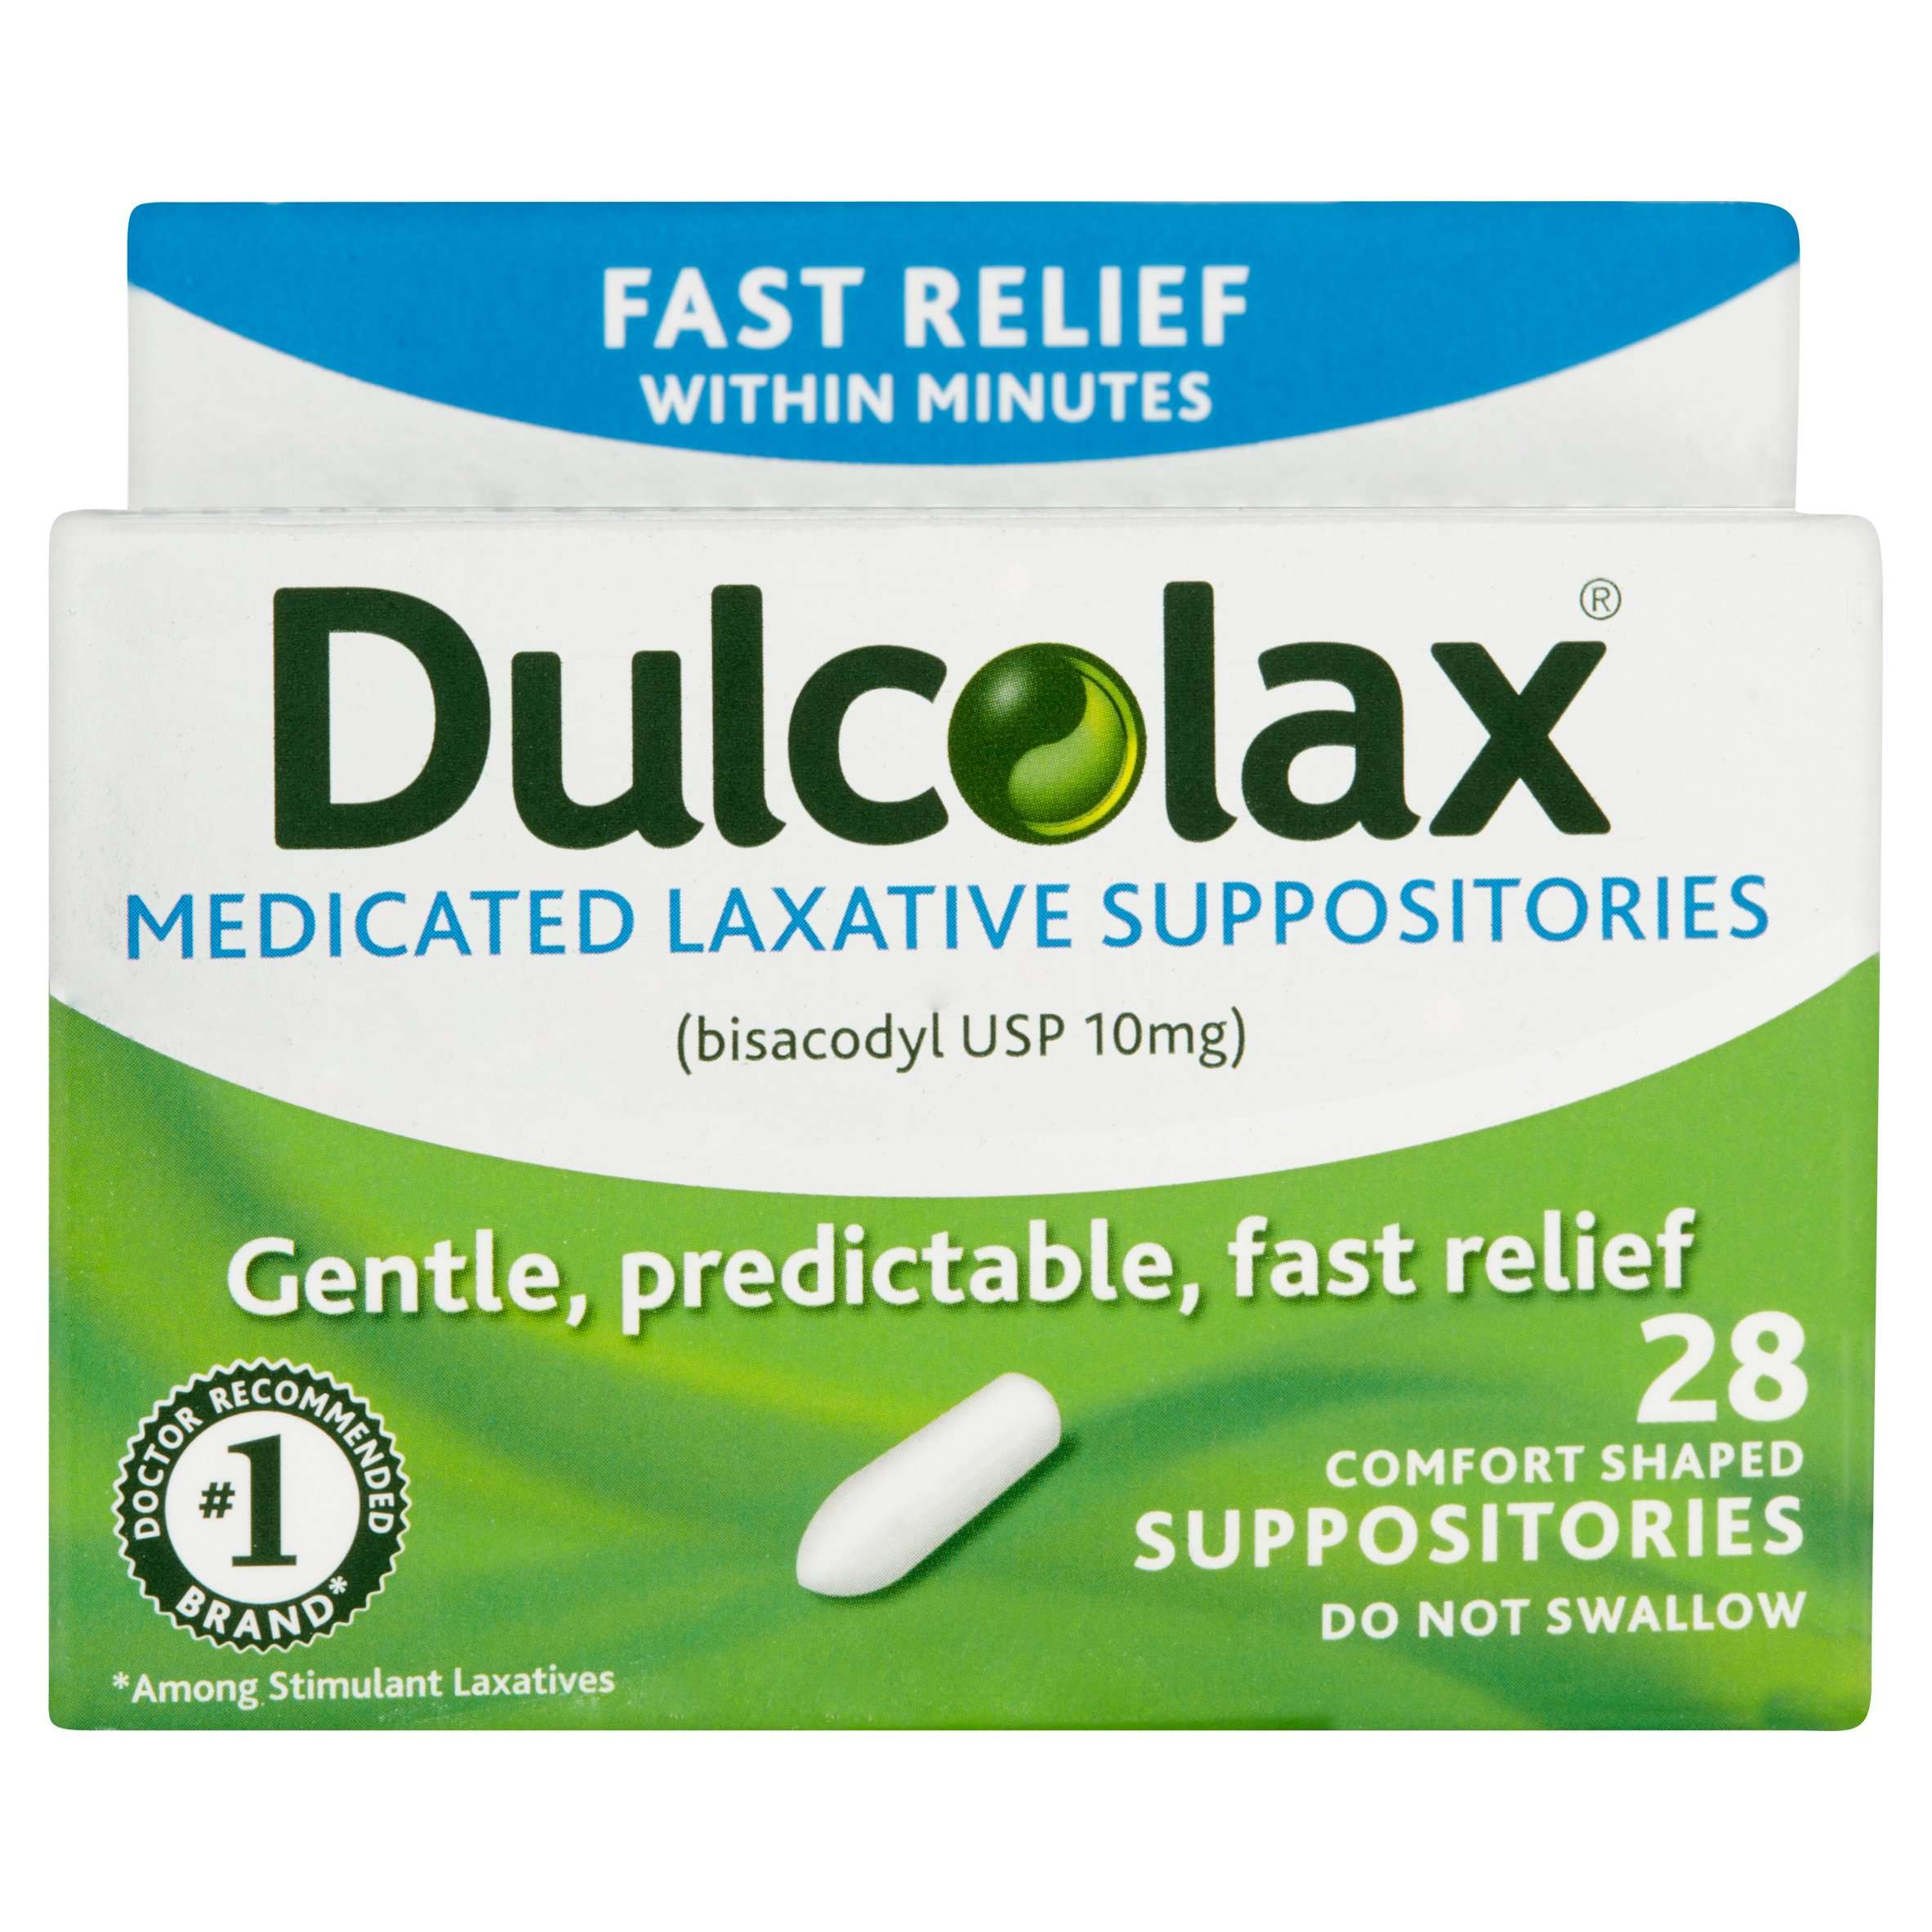 Dulcolax Medicated Laxative Suppositories 28ct